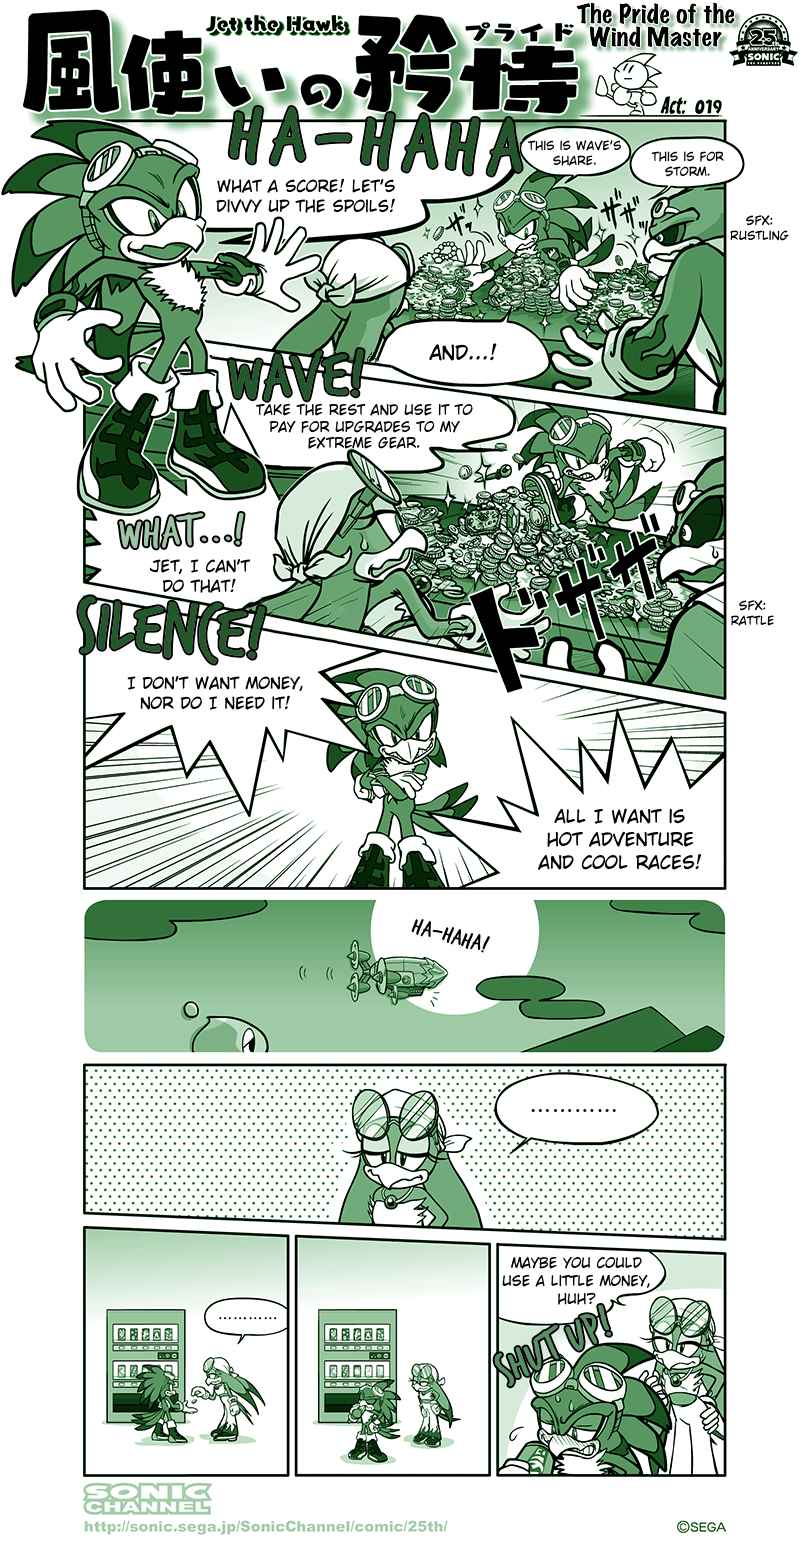 Sonic Comic Ch. 19 (Jet the Hawk) The Pride of the Wind Master